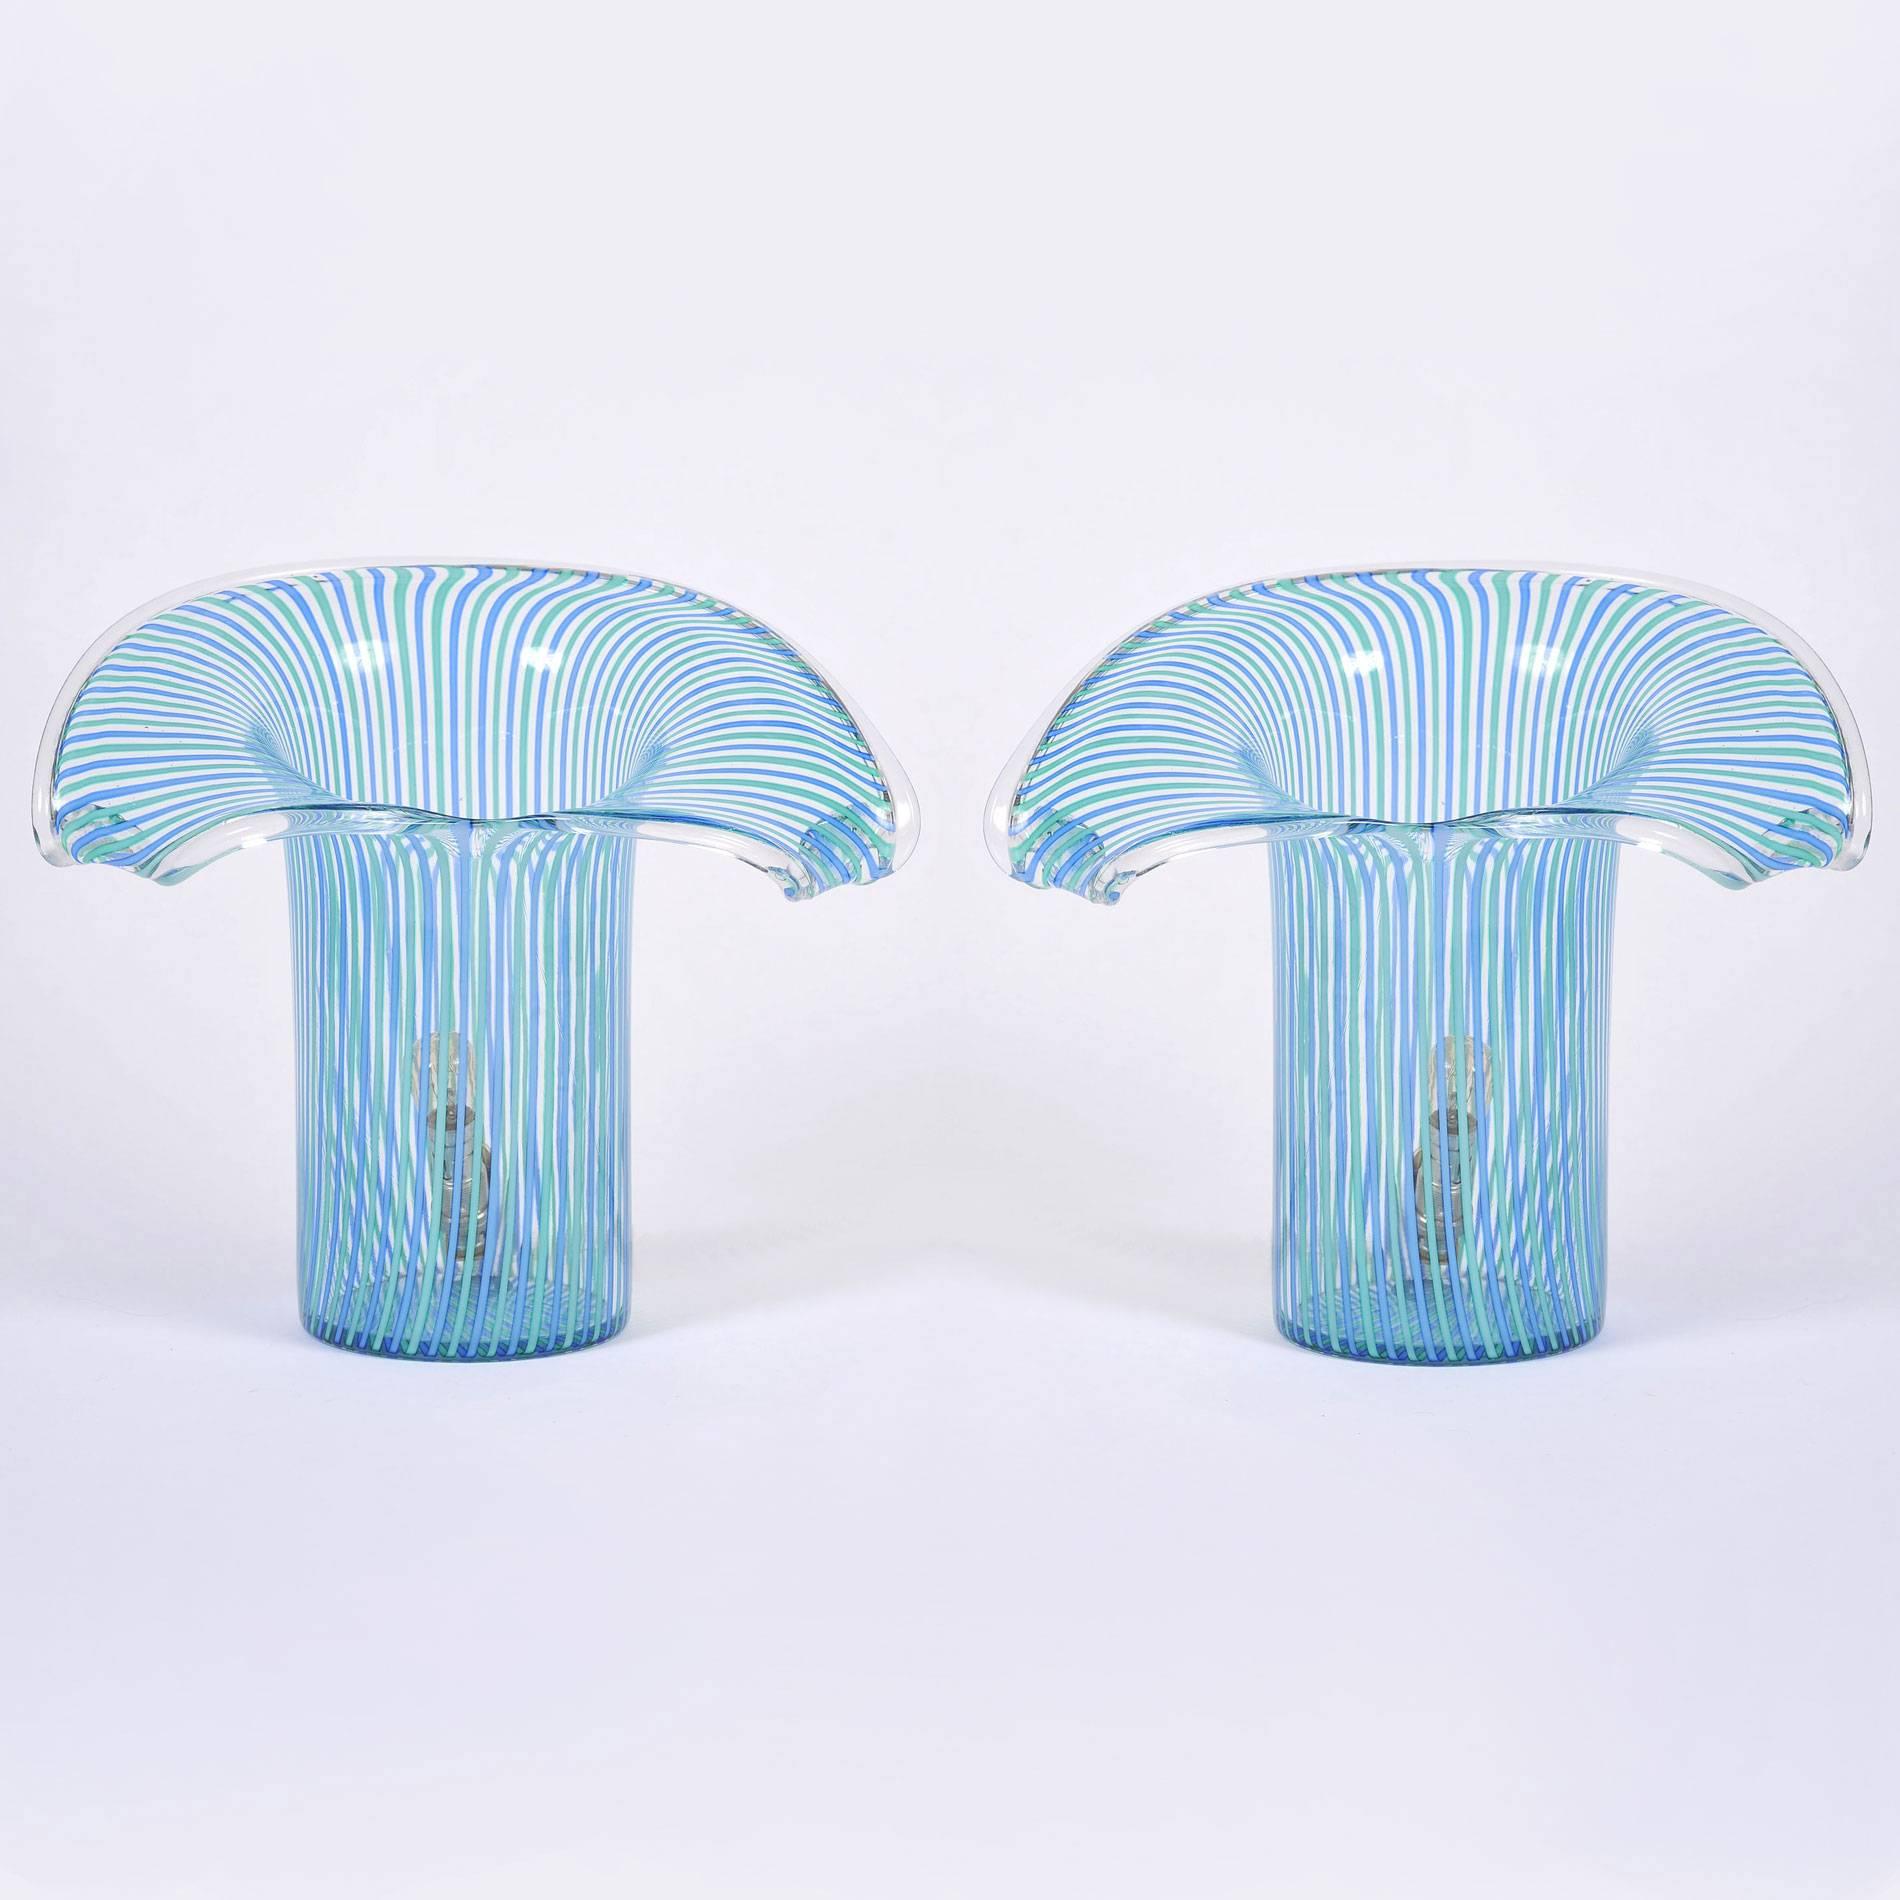 Rare cylindrical glass table lamps with open shaped top in delicately striped blue and green Murano glass.